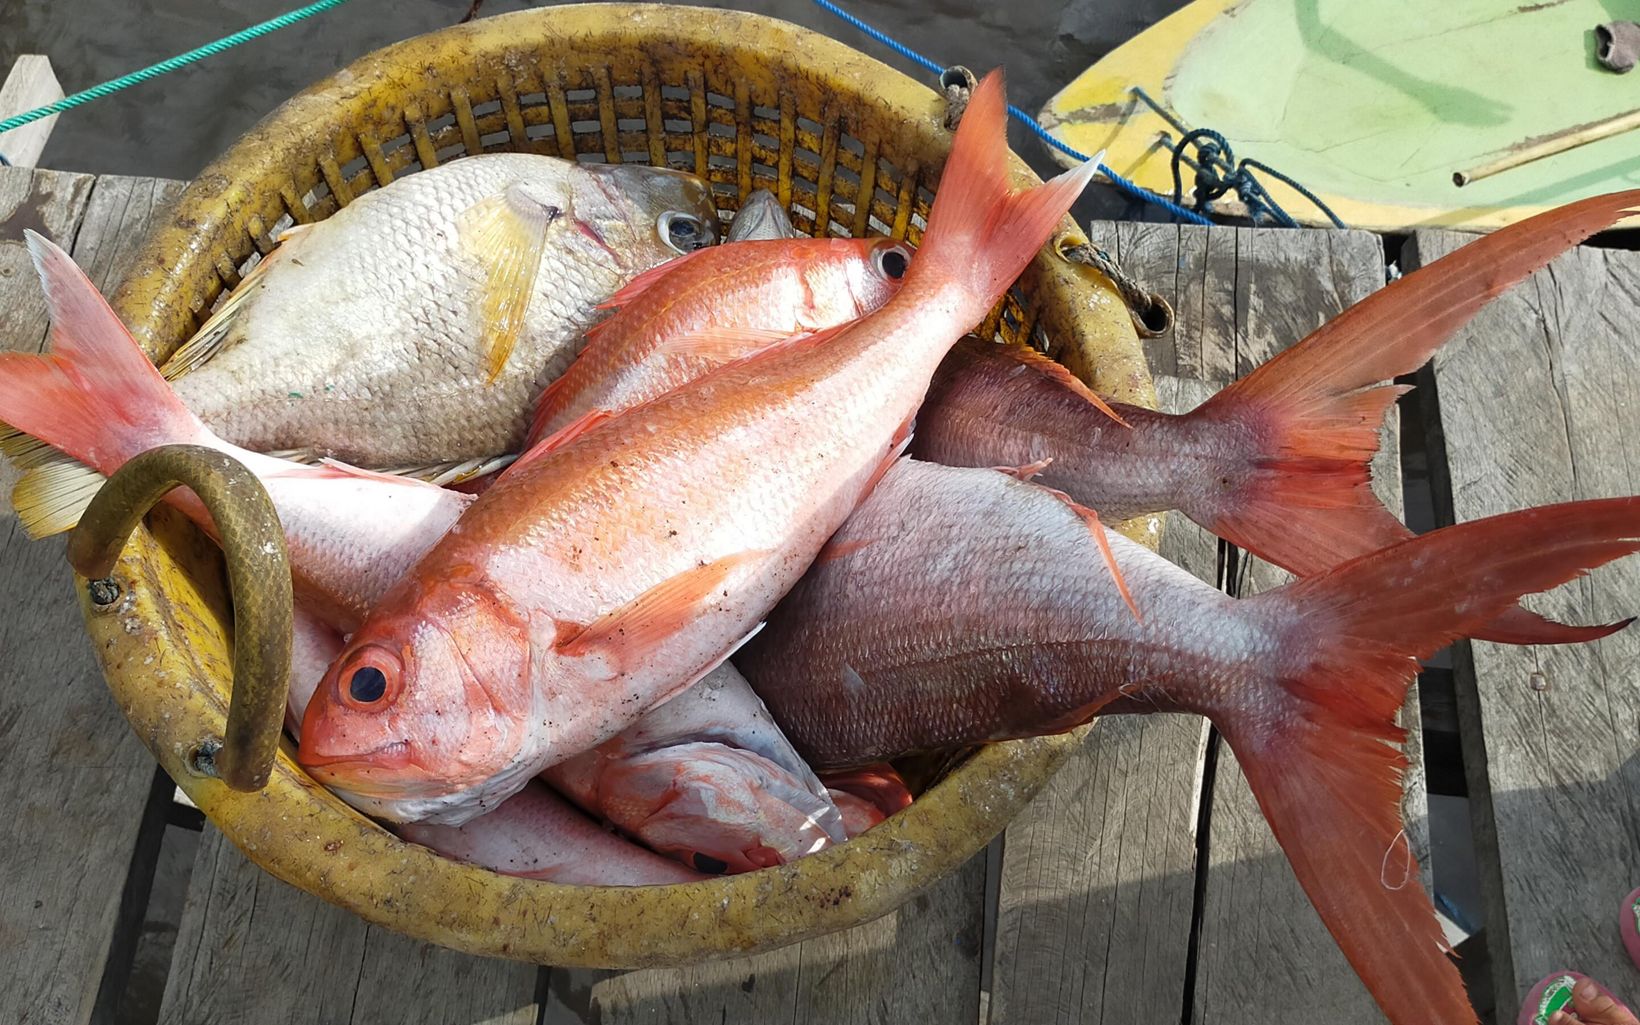 A basked full of red-colored fish. 